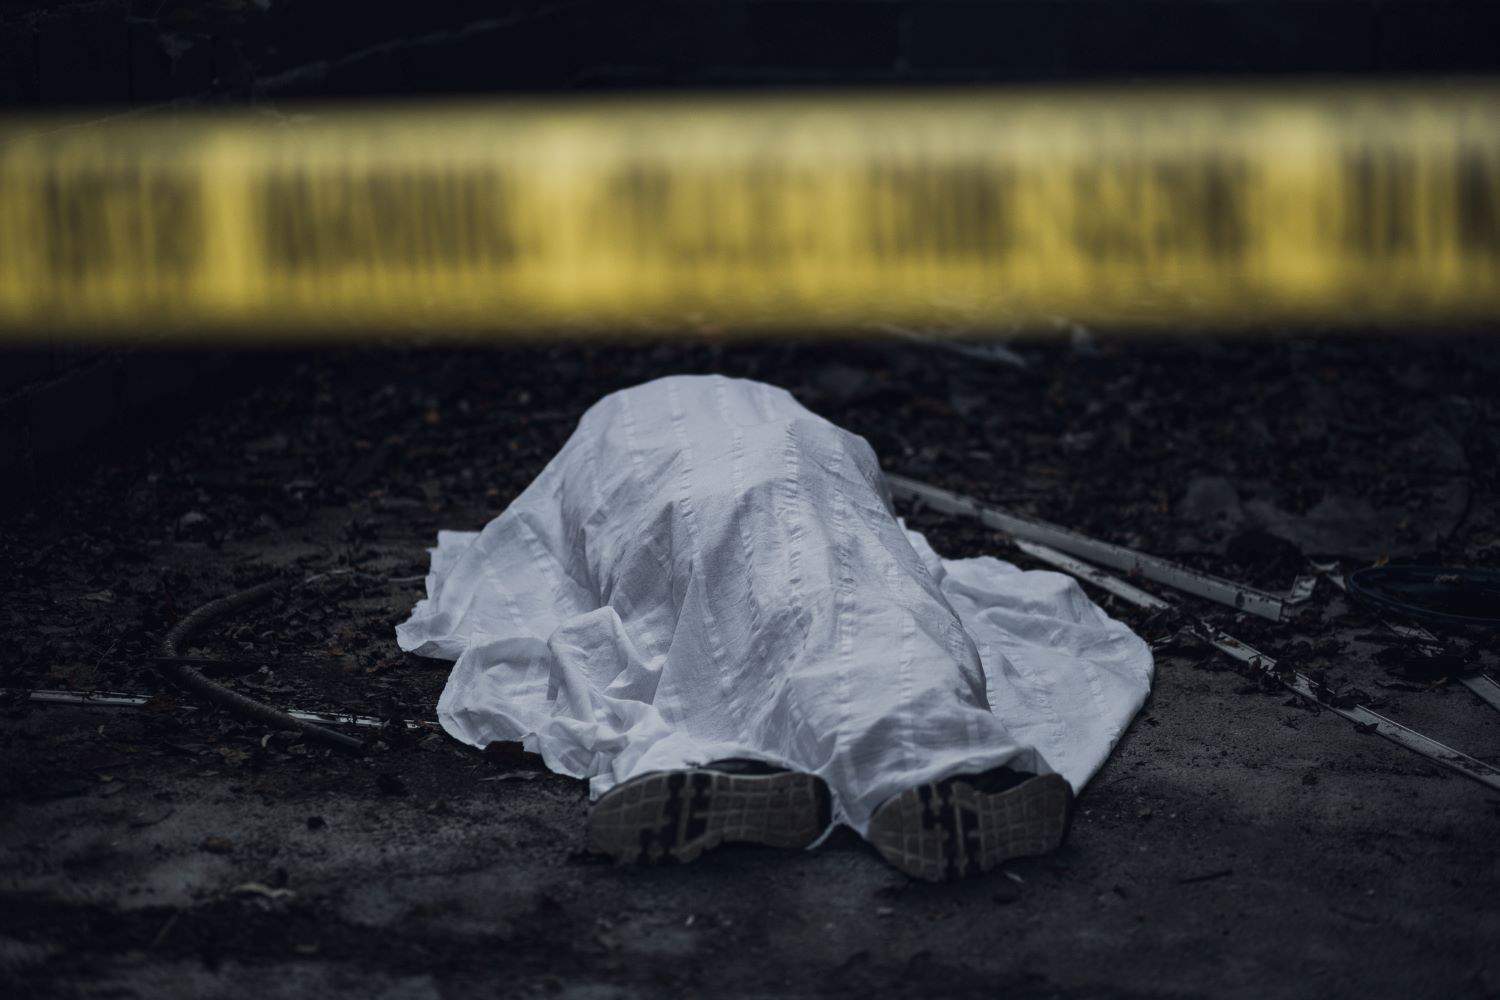 Next of kin sought after three bodies discovered in Parys